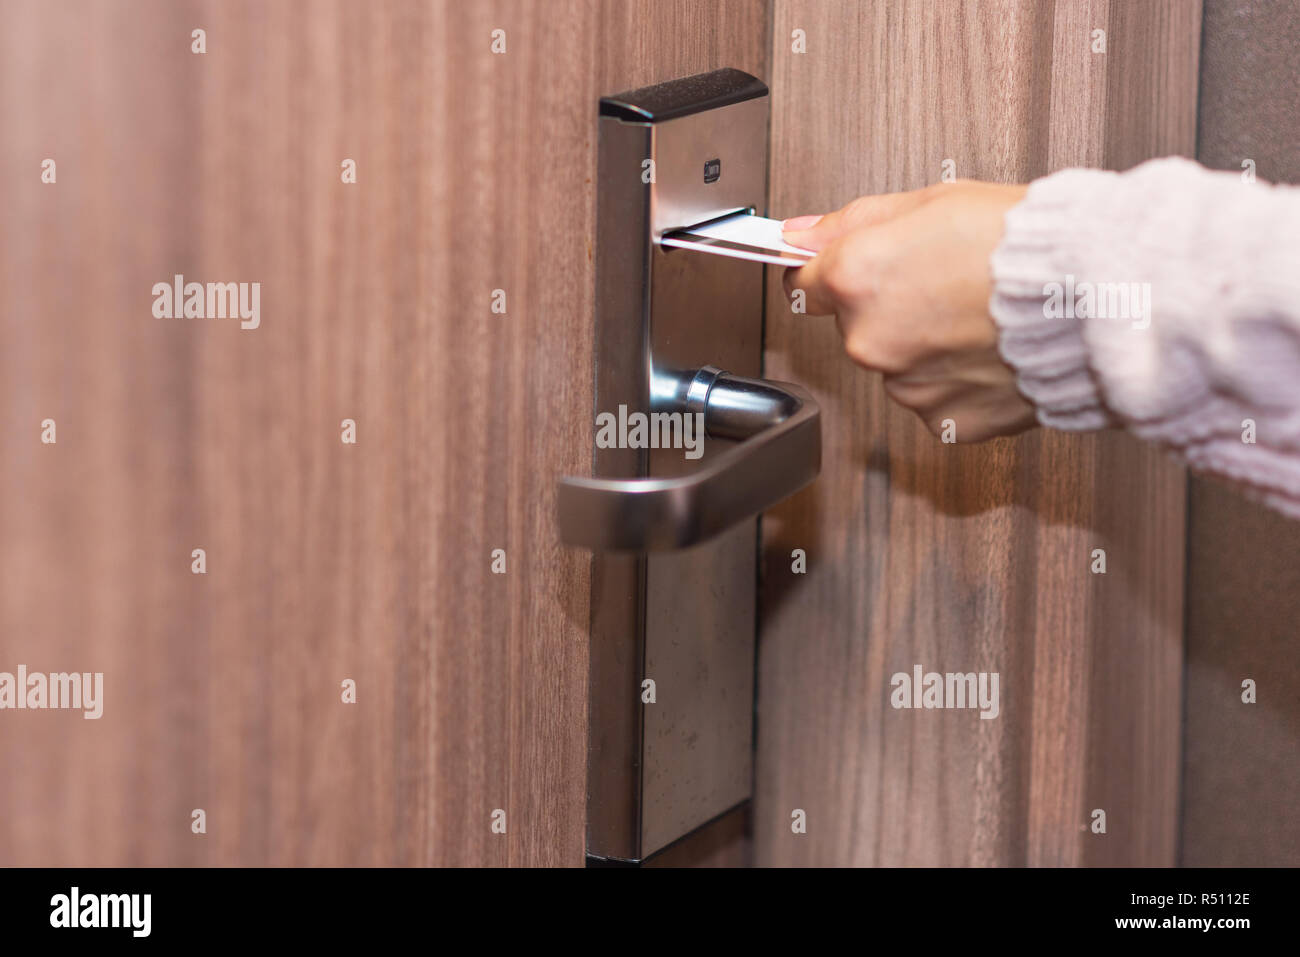 Woman hand inserting card to open electronic lock in hotel door Stock Photo